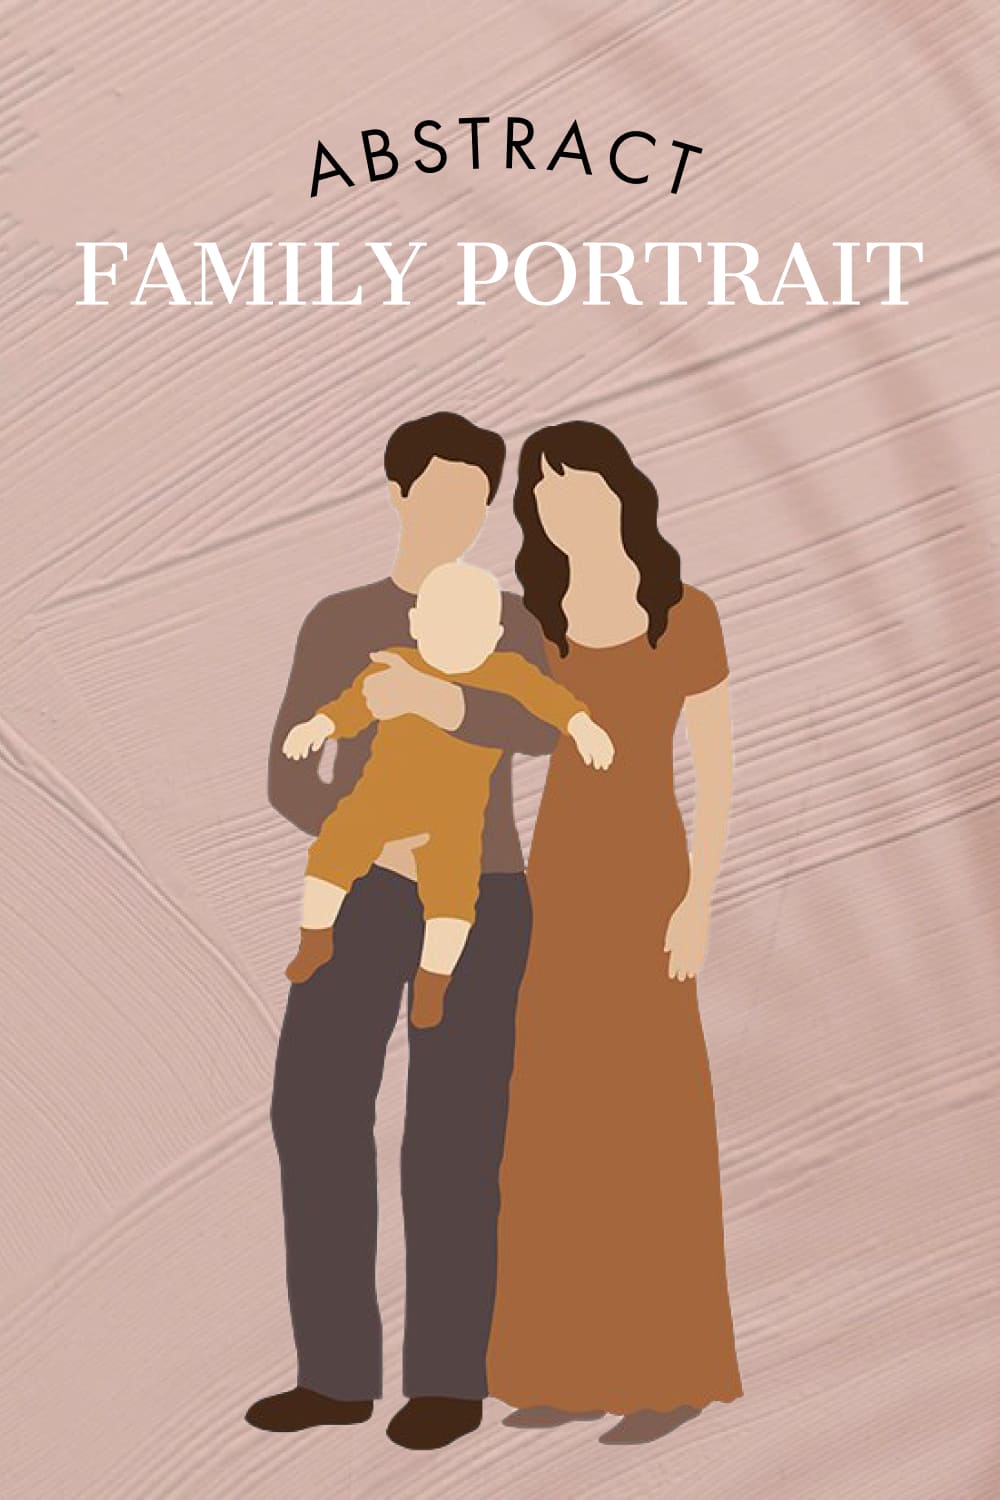 Abstract family portrait SVG clipart, picture for pinterest 1000x1500.